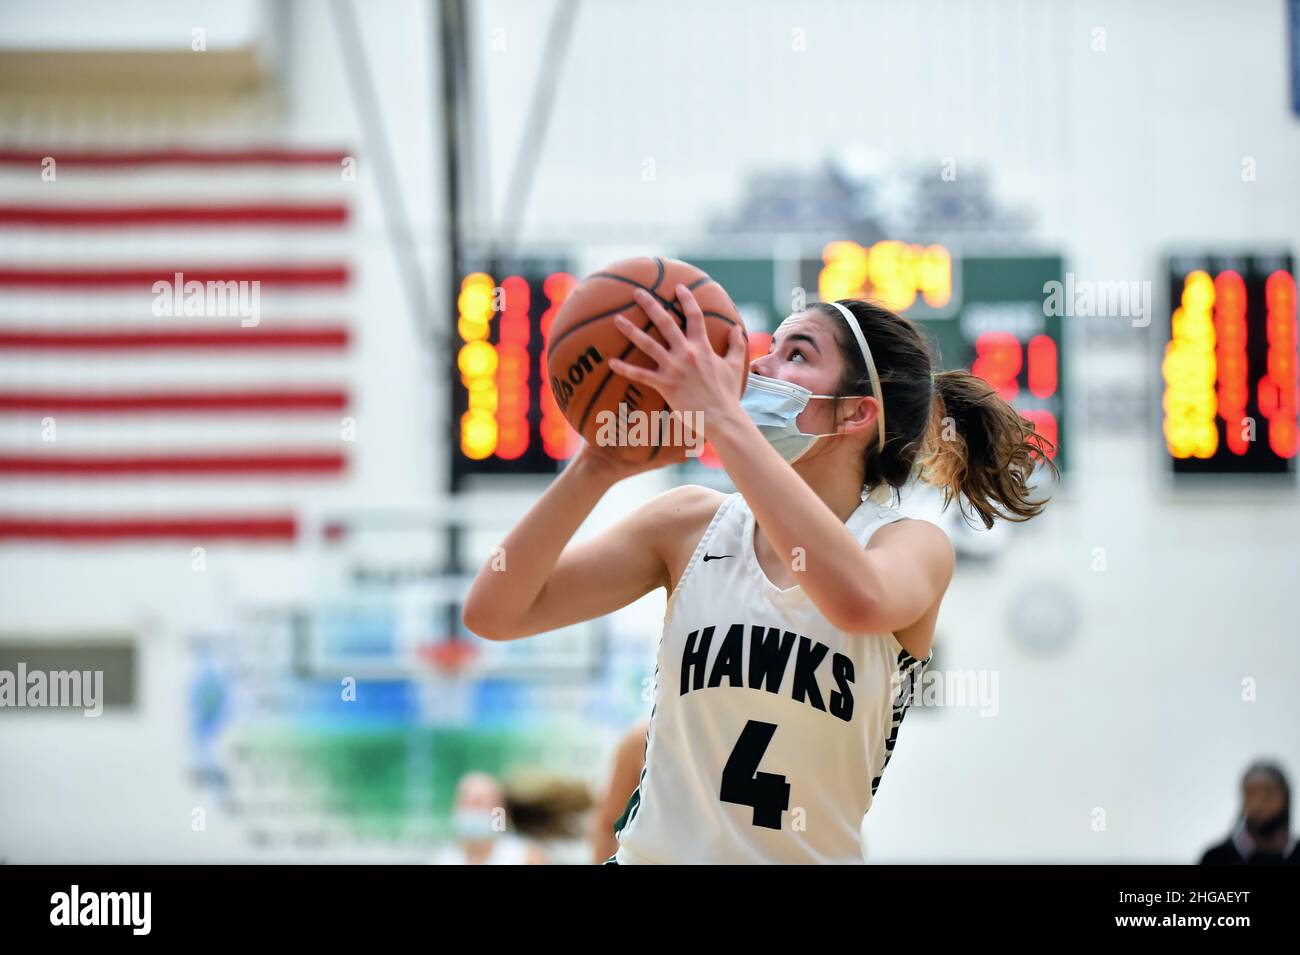 USA. Player pulling up for a shot that would give her team the lead. Stock Photo